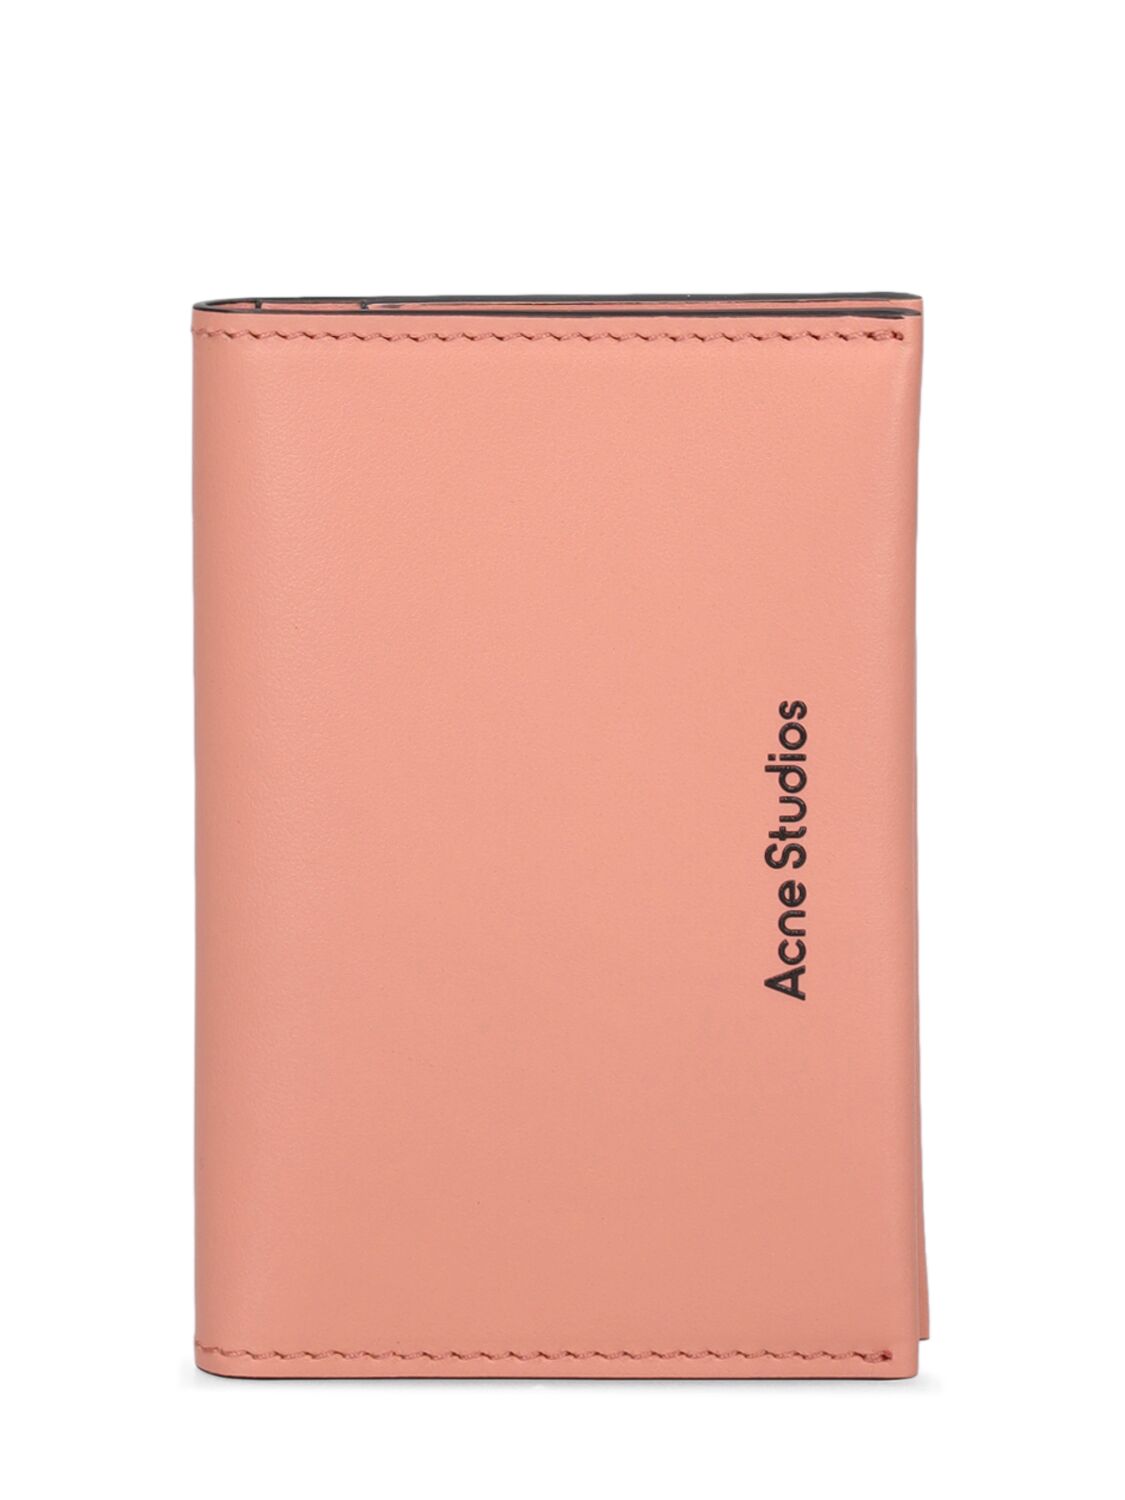 Acne Studios Leather Card Holder In Salmon Pink